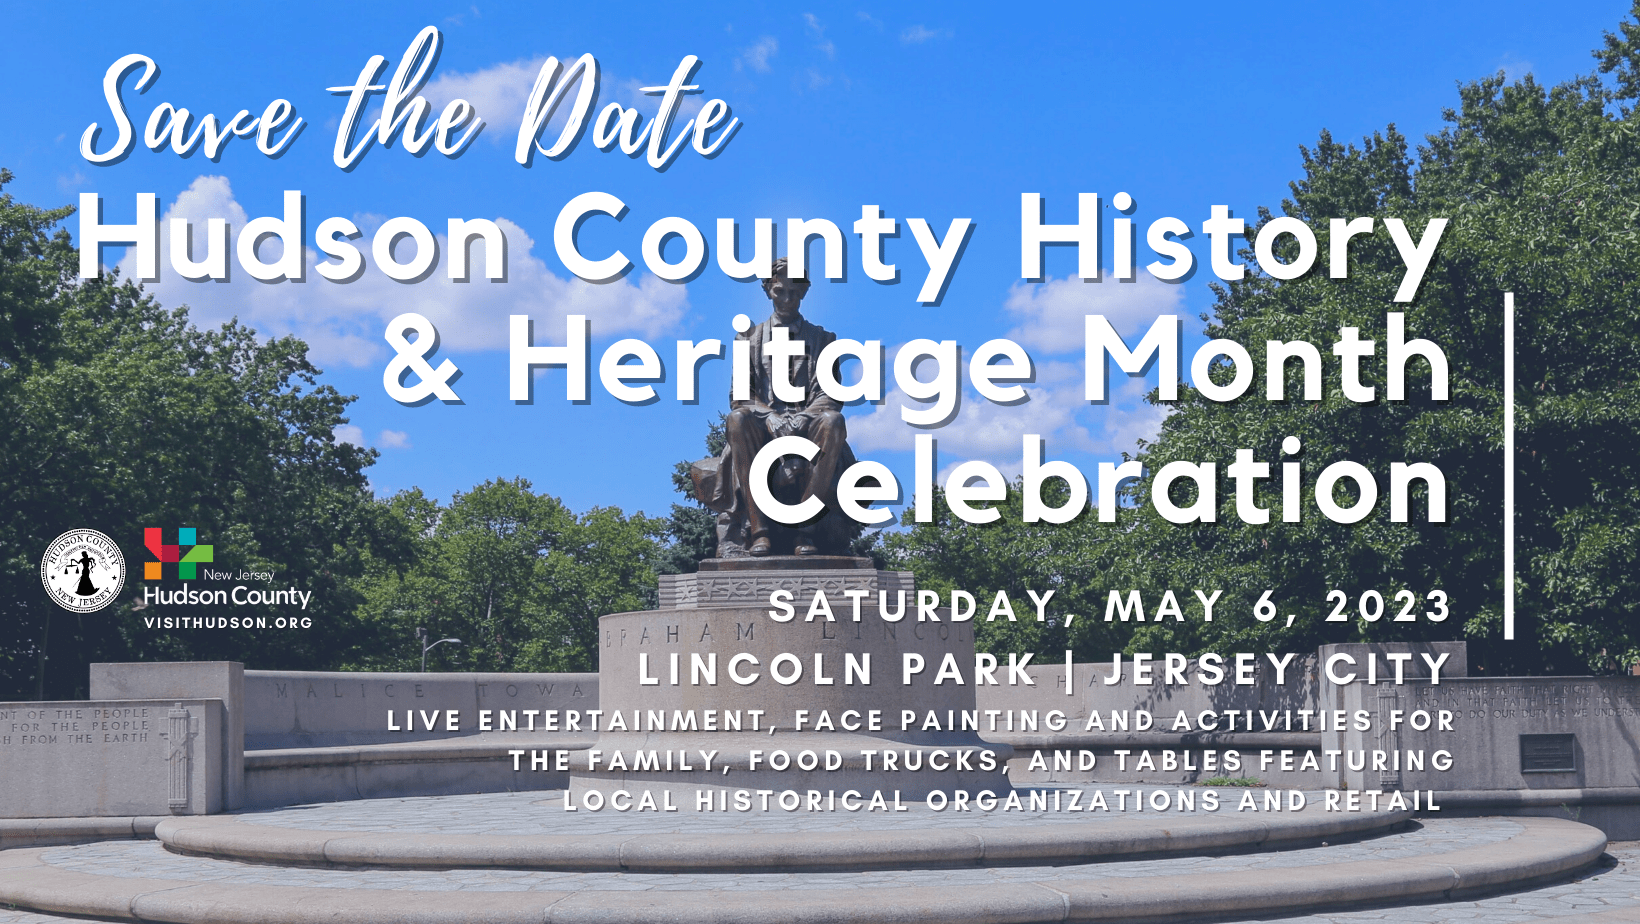 Save the Date Hudson County History & heritage Month Celebration; Saturday May 6th, 2023; Lincoln park, Jersey City; Live entertainment, face painting and activities for the family, food trucks and tables featuring local historical organizations and retail